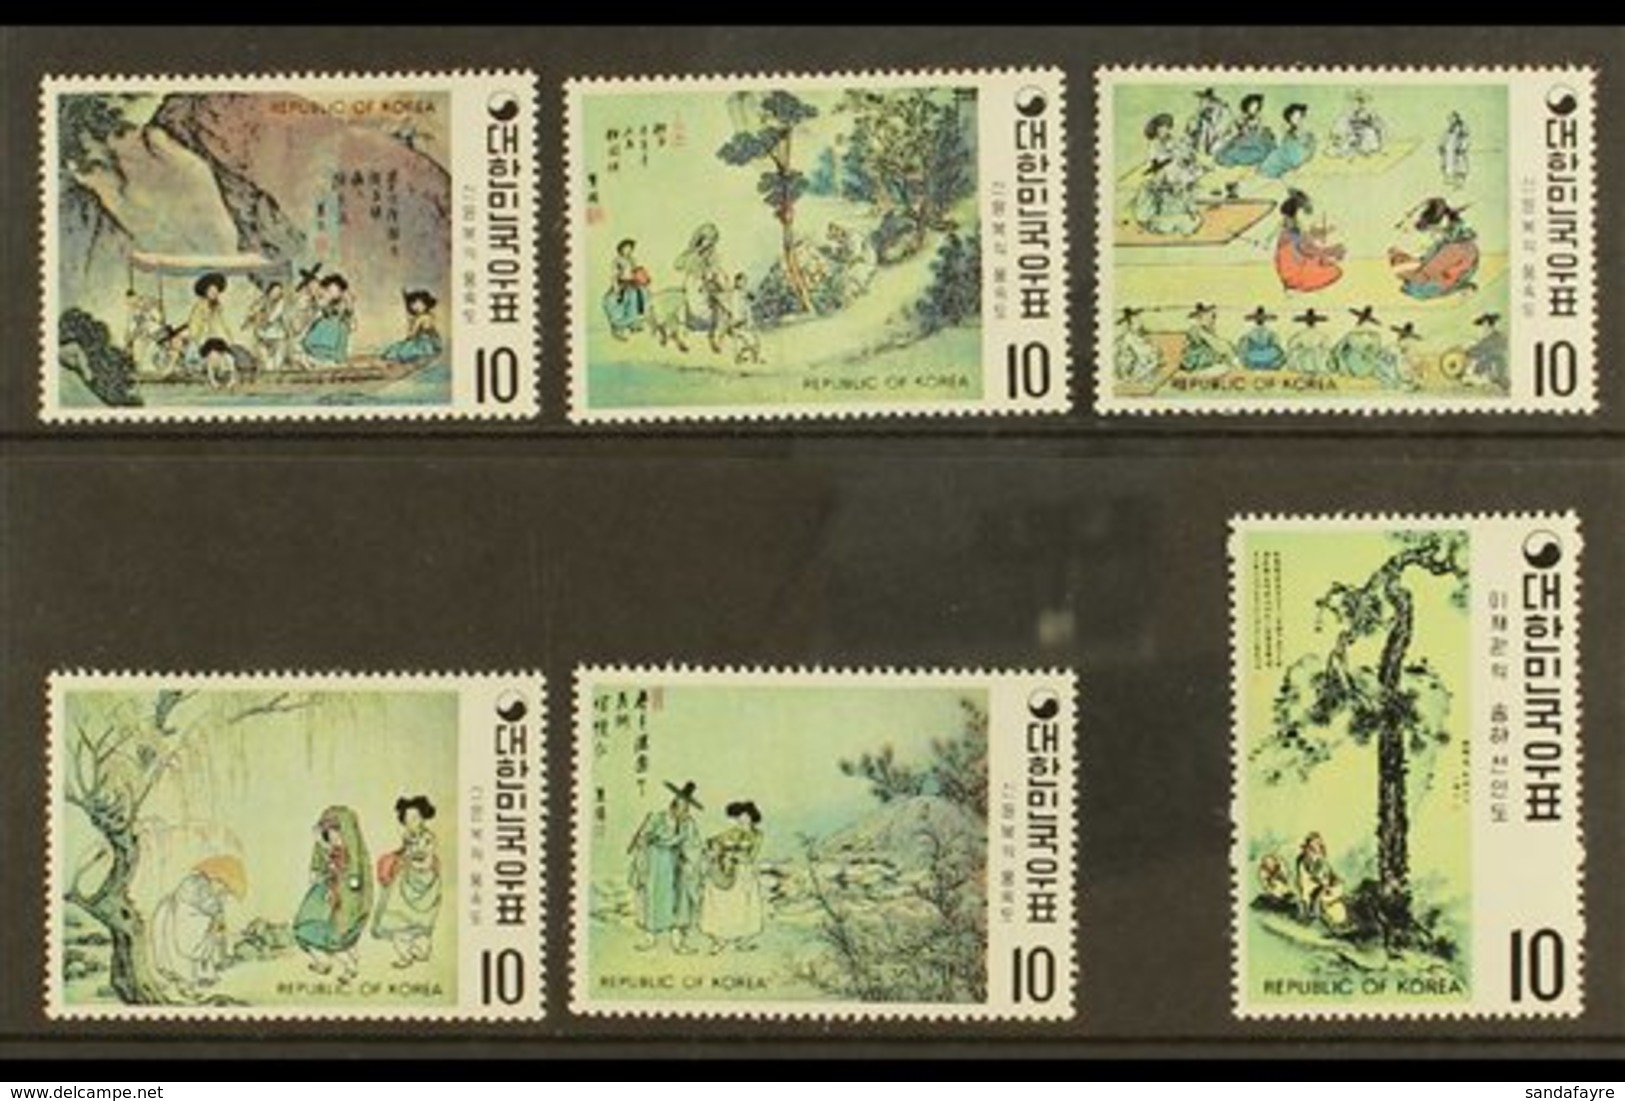 1971 Painting Fourth Series Complete Set & All Mini-sheets, SG 947/52 & MS 953, Fine Never Hinged Mint, Fresh. (6 Stamps - Korea, South